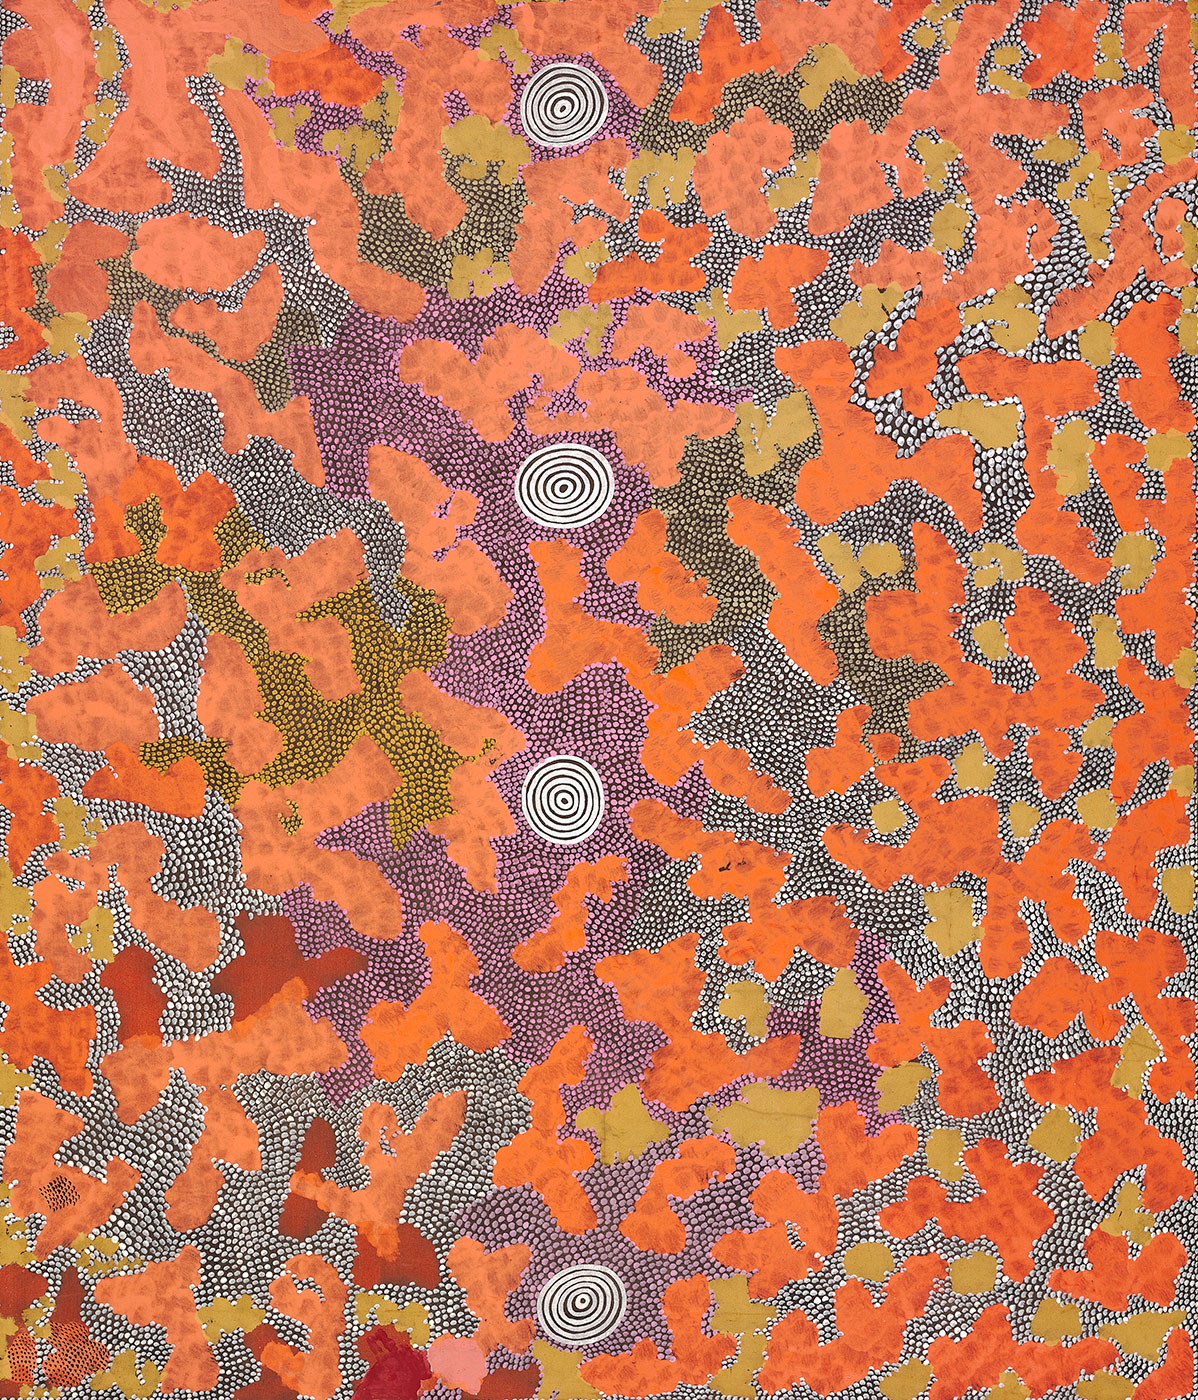 Budgerigars in the Sandhills 1975 by Billy Stockman Tjapaltjarri. - click to view larger image